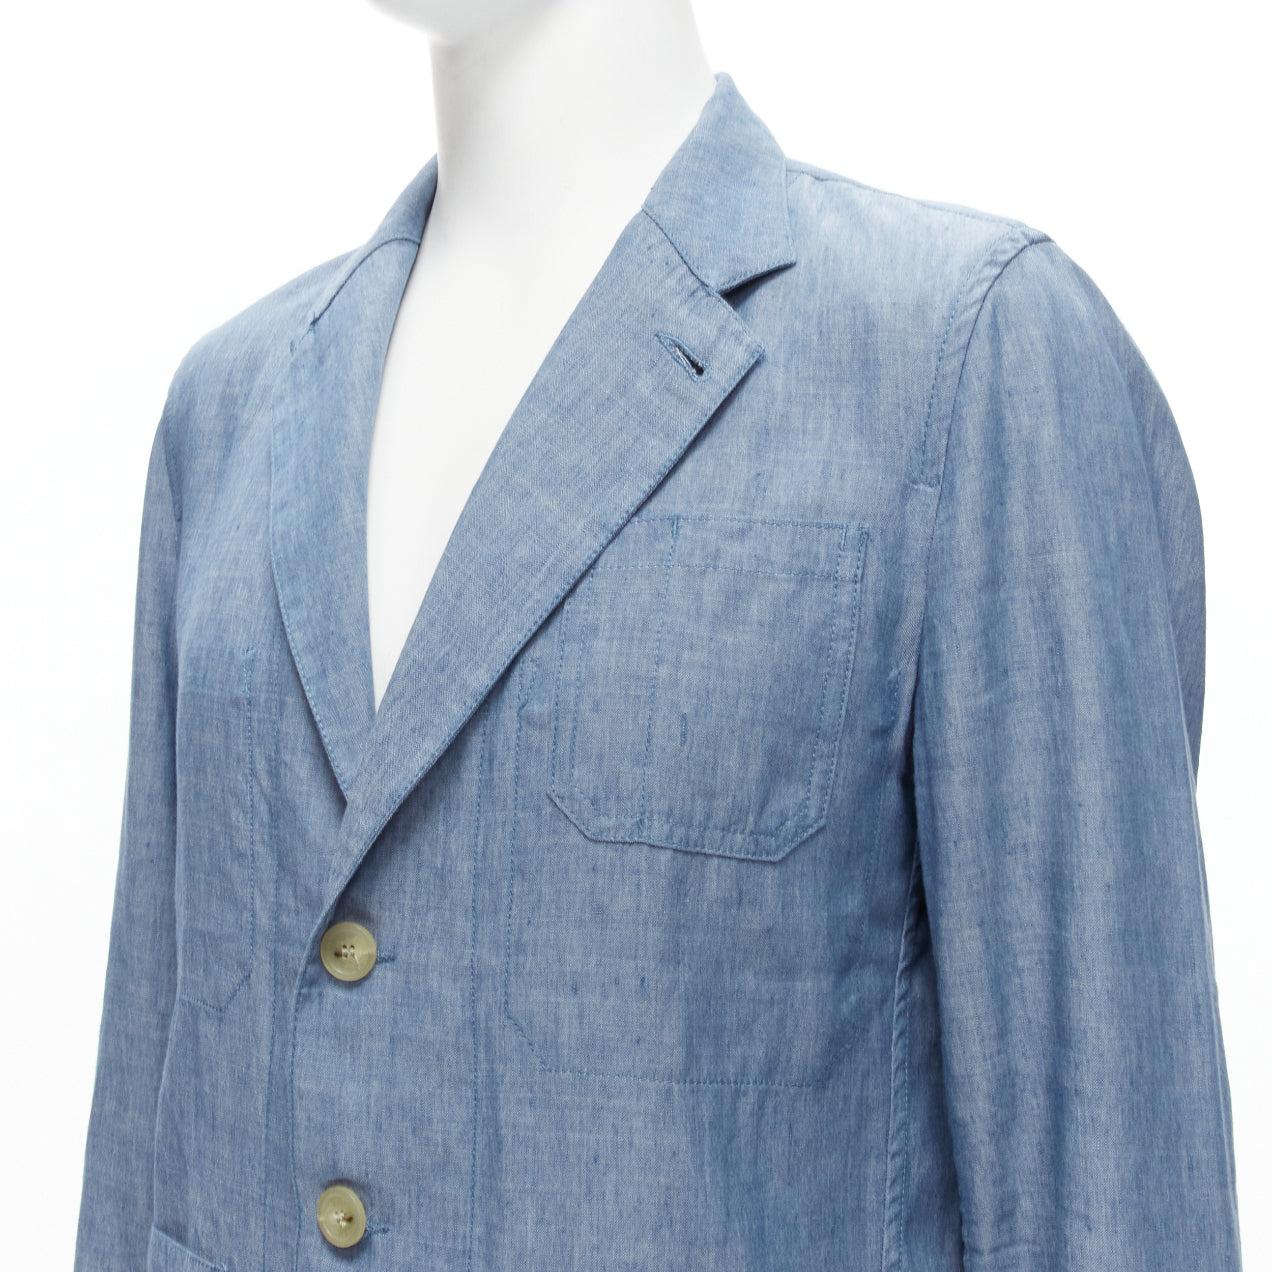 MAISON KITSUNE blue textured fabric classic 3 pockets lightweight blazer jacket L
Reference: YNWG/A00180
Brand: Maison Kitsune
Material: Feels like cotton
Color: Blue
Pattern: Solid
Closure: Button
Made in: Tunisia

CONDITION:
Condition: Excellent,